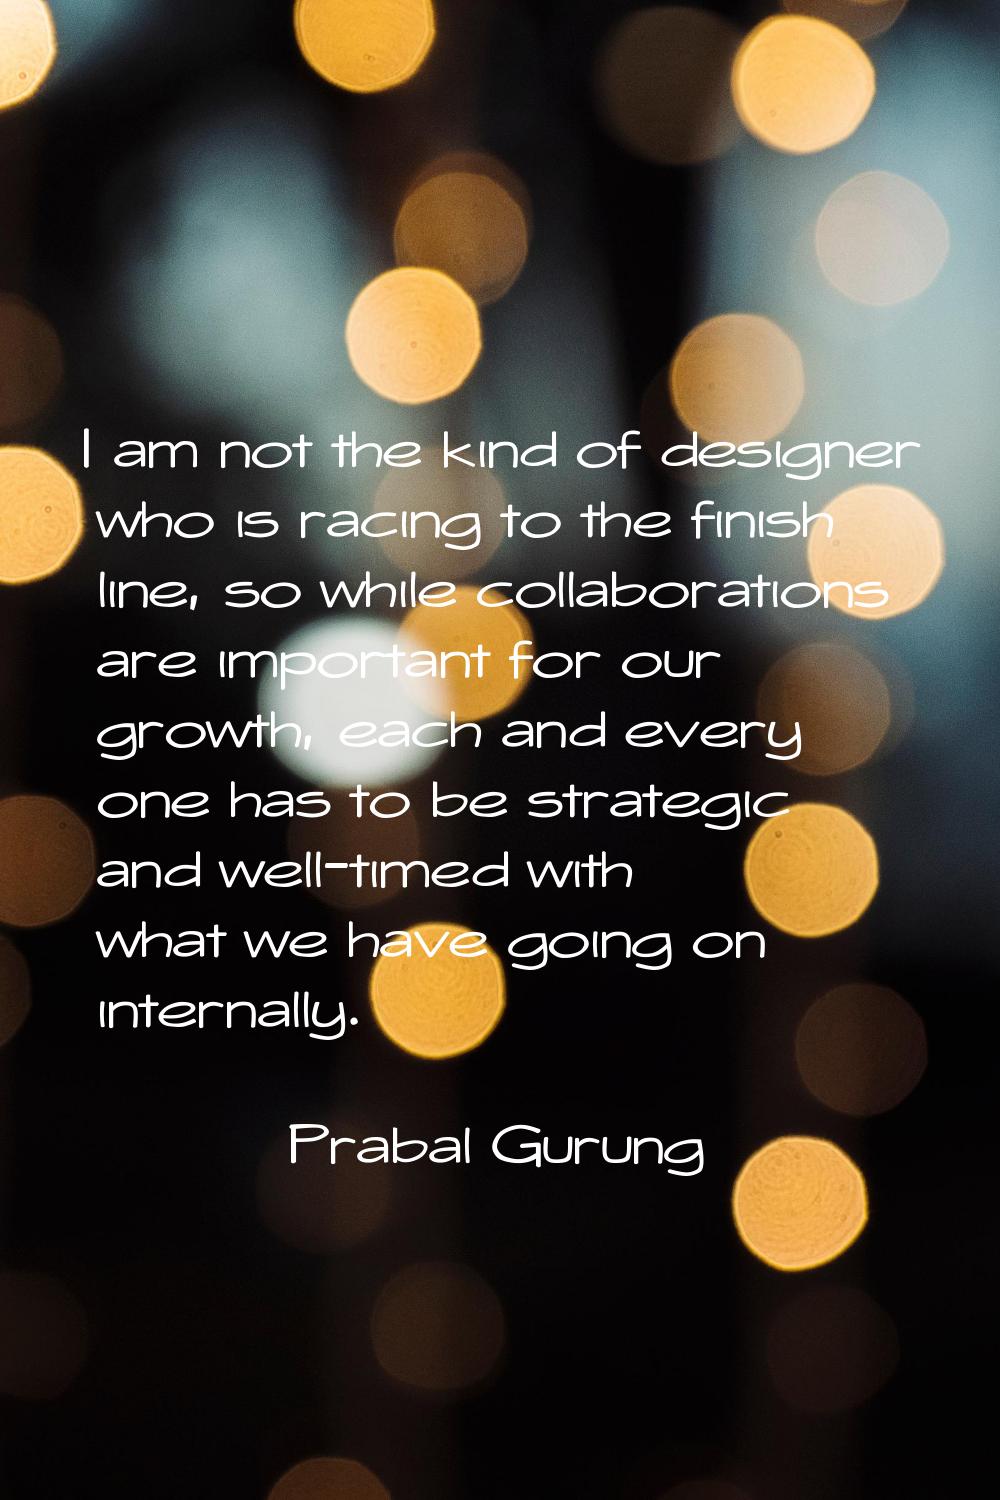 I am not the kind of designer who is racing to the finish line, so while collaborations are importa